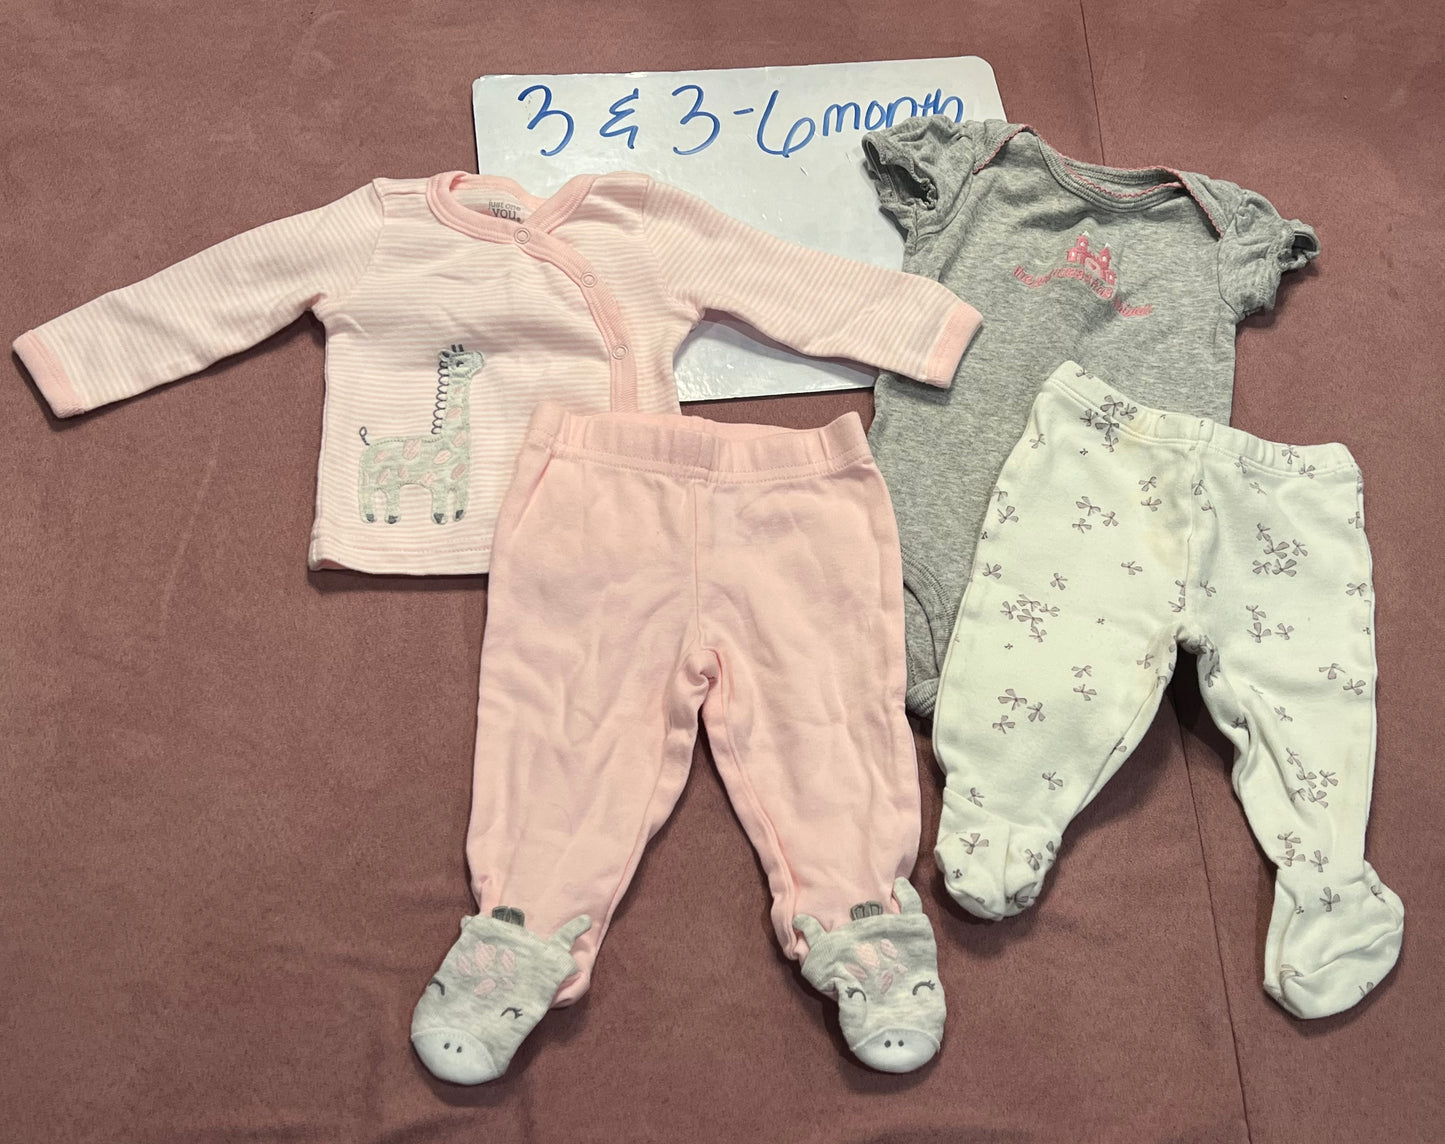 3 and 3-6 month girls bundle (4)